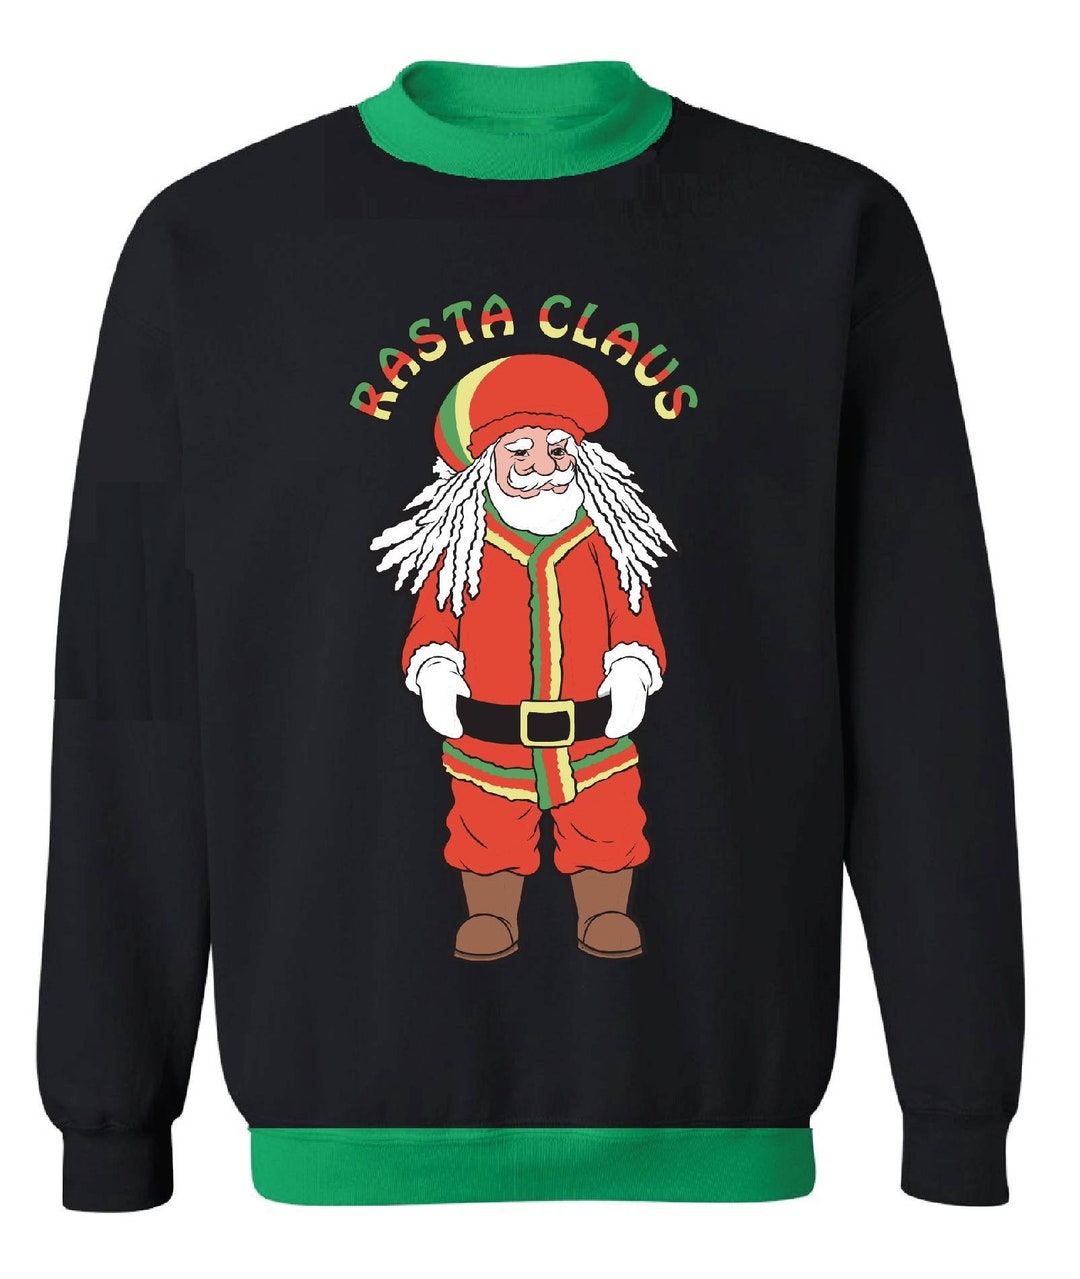 Rasta Claus Ugly Christmas Sweater Mens and Womens - Etsy